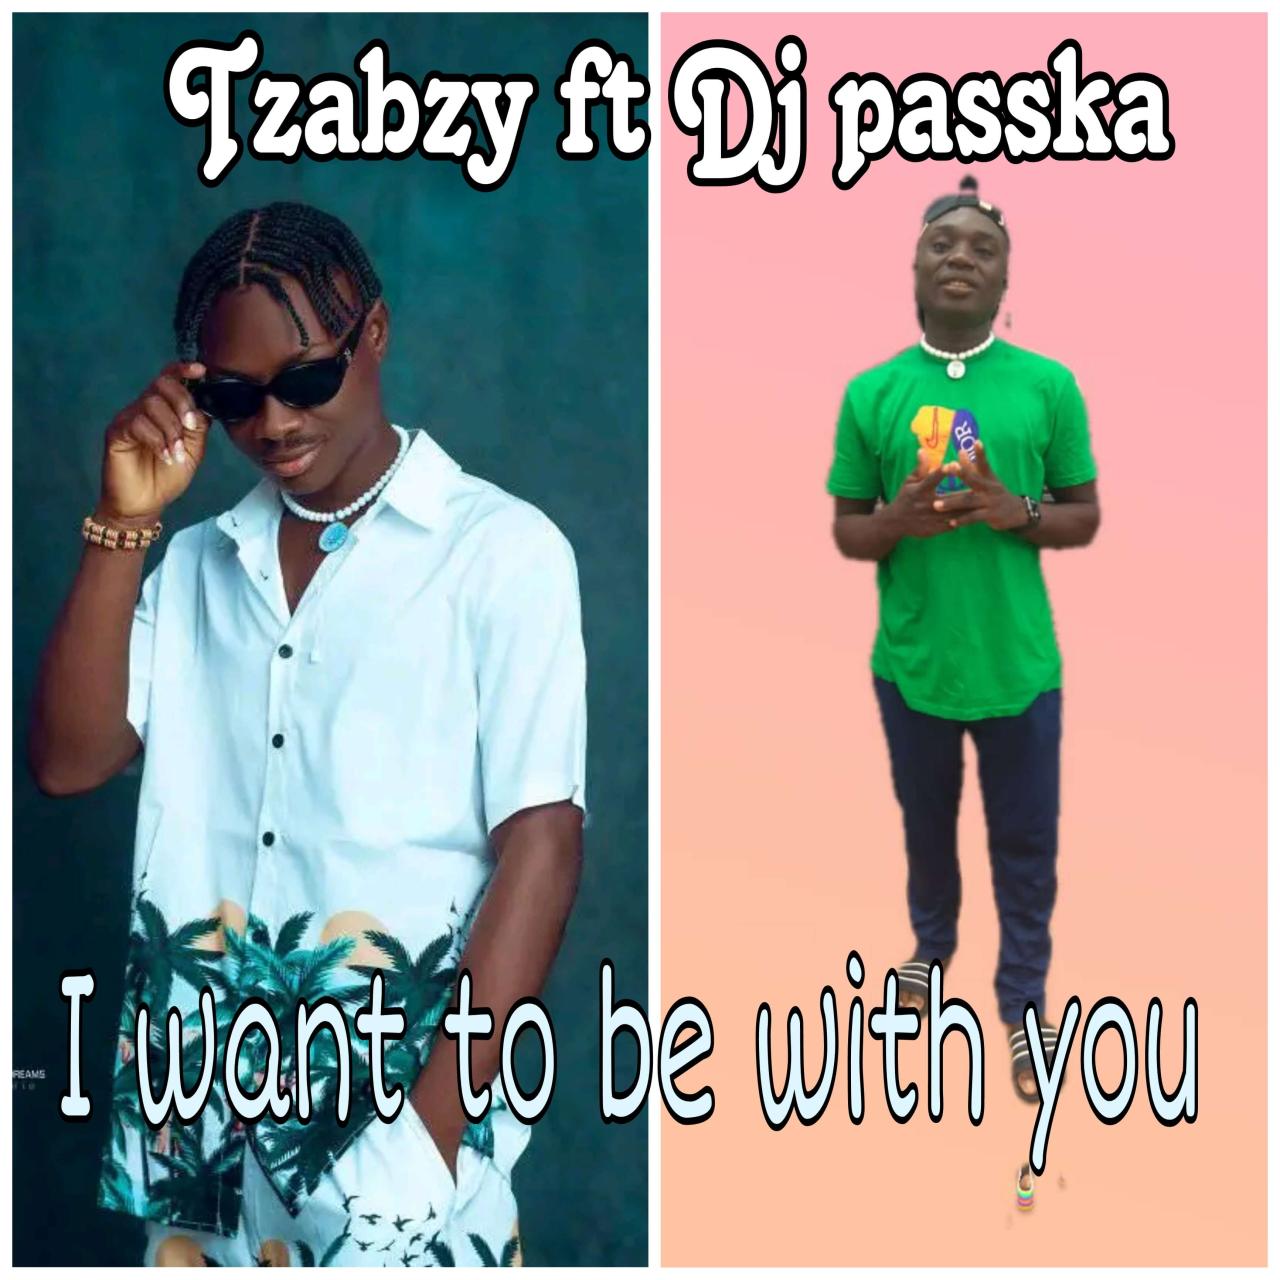 Tzabzy ft Dj Passka - I want to be with you